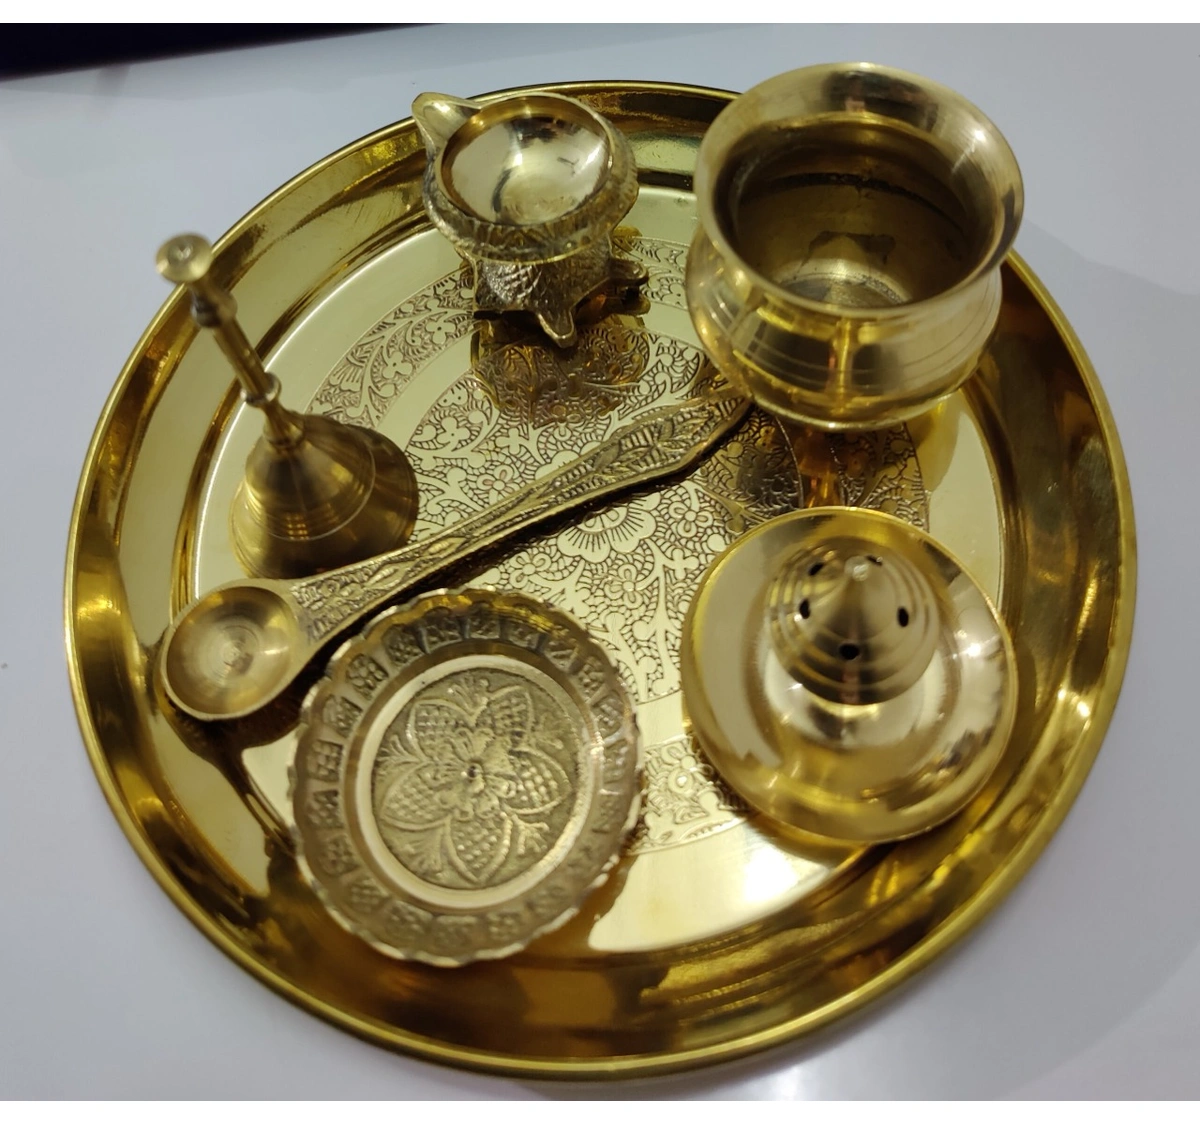 BulkySanta Brass Pooja Thali Set with Handcrafted Etching Design